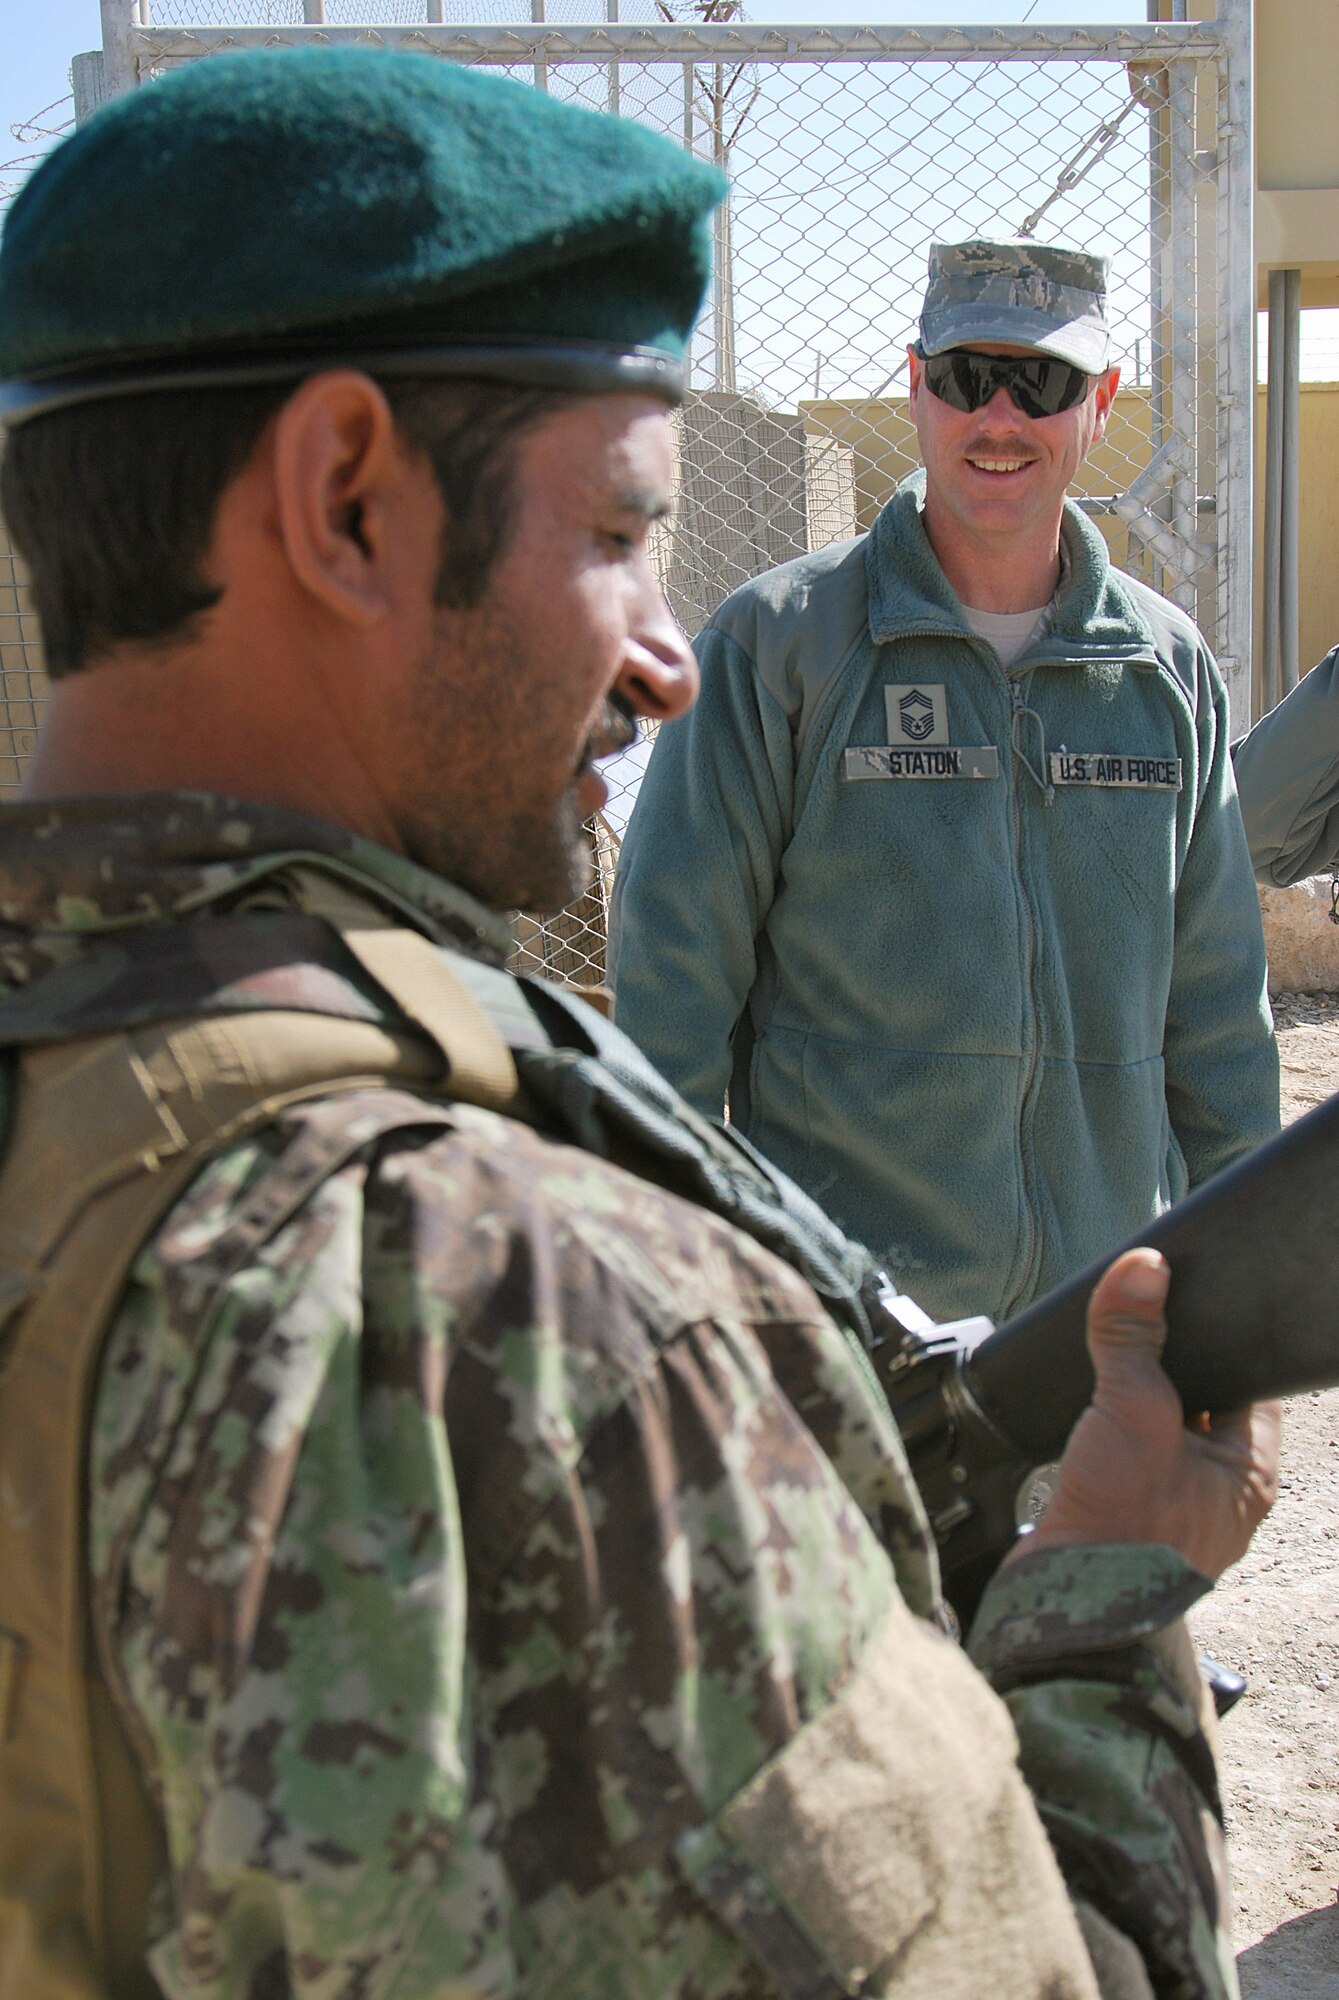 Chief Master Sgt. Dave Staton talks to an Afghan Security Forces airman about his weapon Dec. 1, 2010, at Kandahar Airfield, Afghanistan. Chief Staton is the 738th Air Expeditionary Advisory Group superintendent. As the senior enlisted member, he is also the direct mentor to the Kandahar Air Wing’s enlisted leader, Command Sgt. Maj. Mohammad Hassan. (U.S. Air Force photo/Senior Airman Melissa B. White)